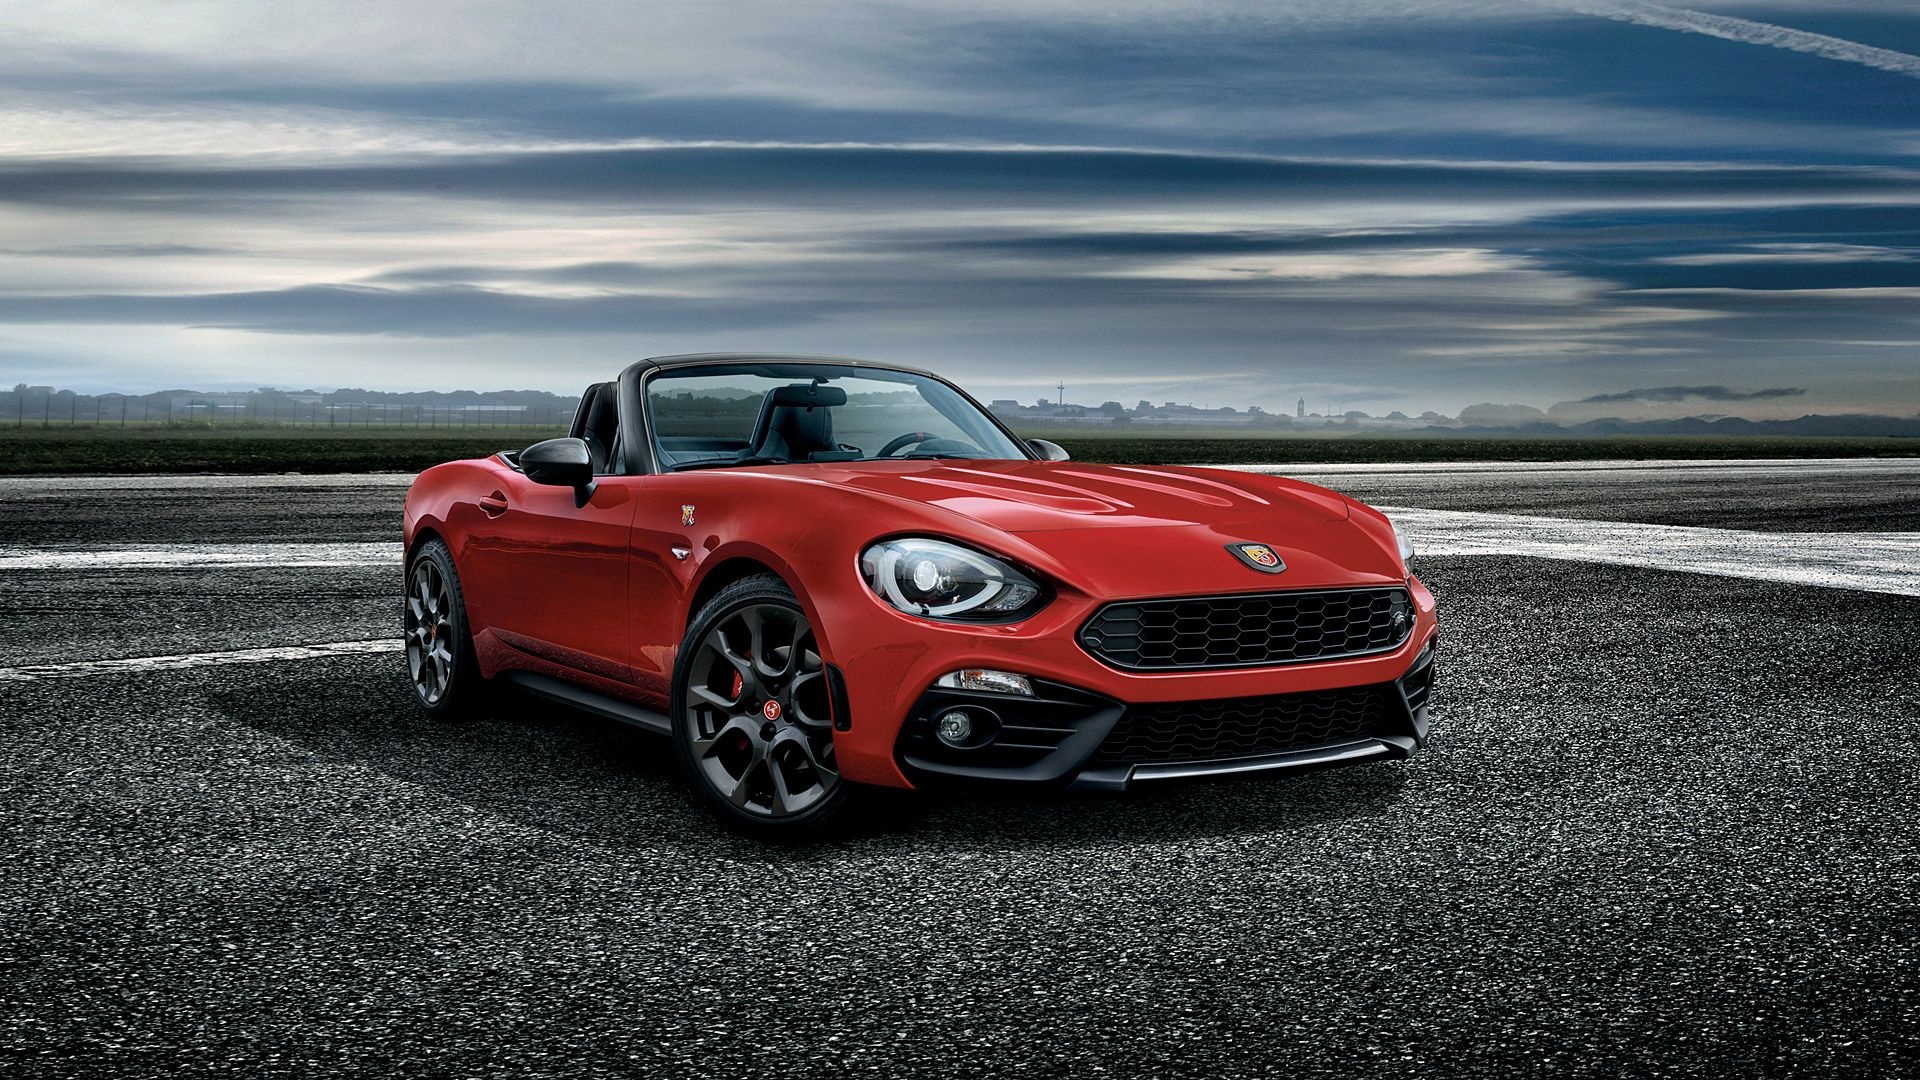 Fiat 124 Spider, Abarth edition wallpapers, High-quality backgrounds, Sporty, 1920x1080 Full HD Desktop